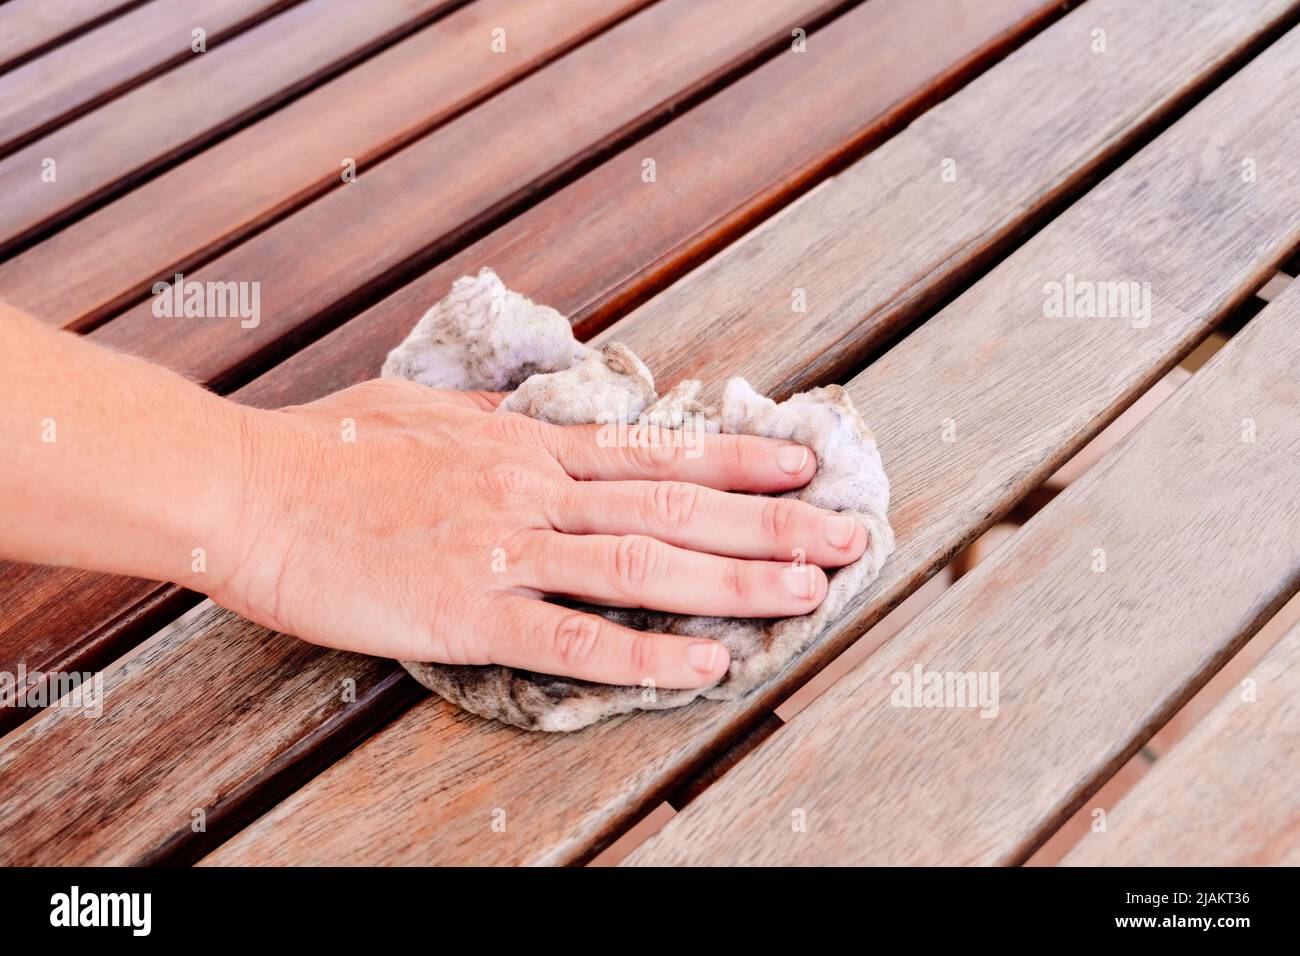 Woman's hand with a dirty rag wipes a table from wooden boards. Stock Photo